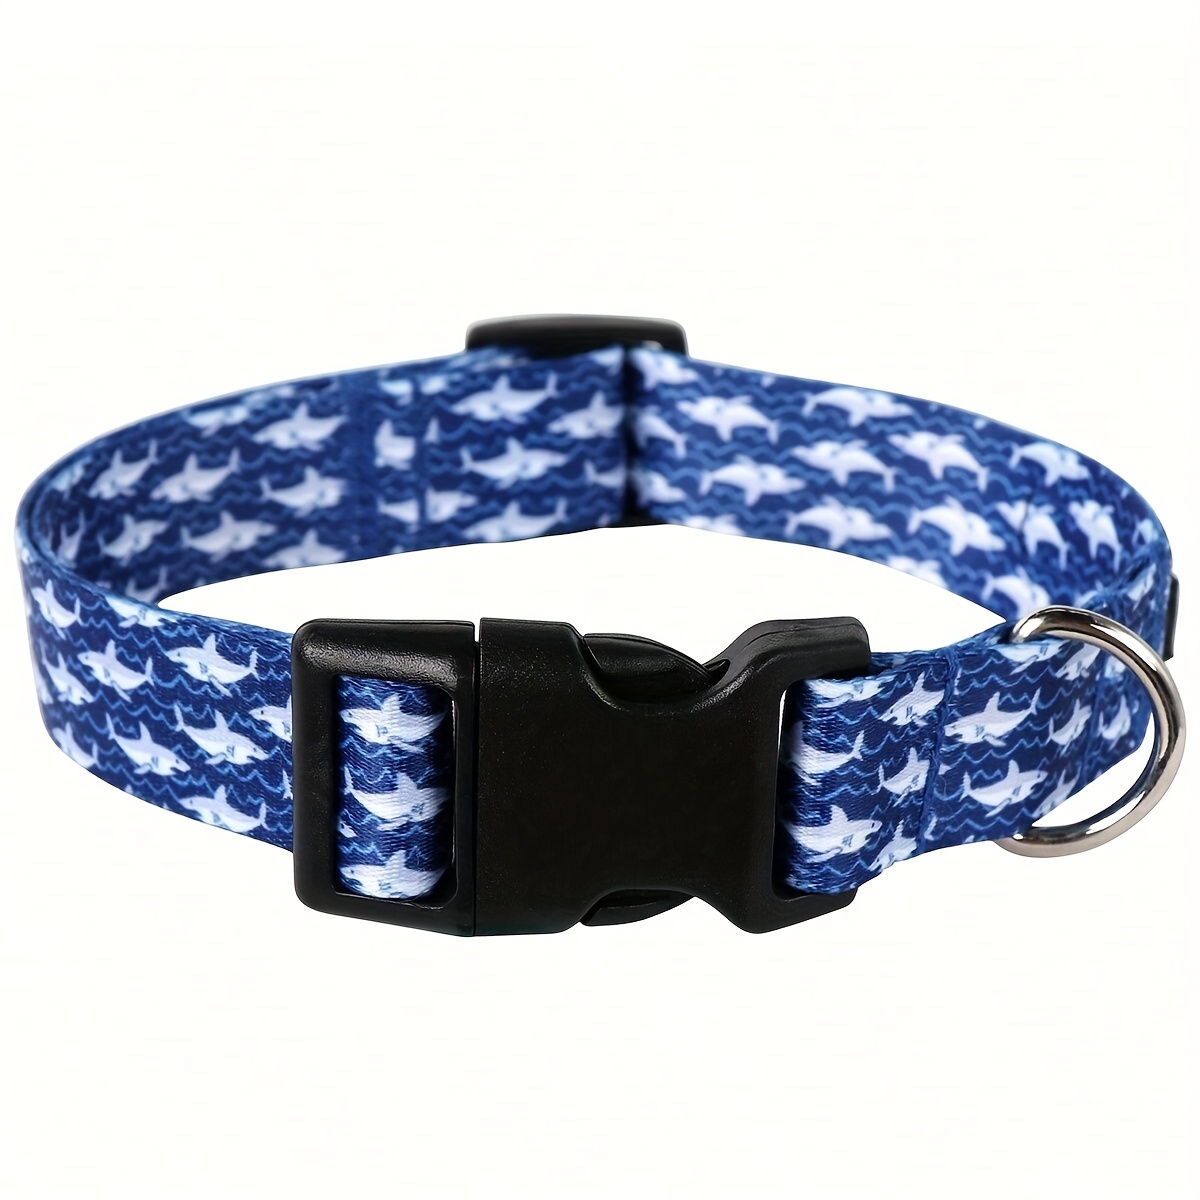 

Light Blue Shark Pattern Cotton Dog Collar - Adjustable, Comfort Fit For Small To Medium Breeds Shark Outfit For Small Dogs